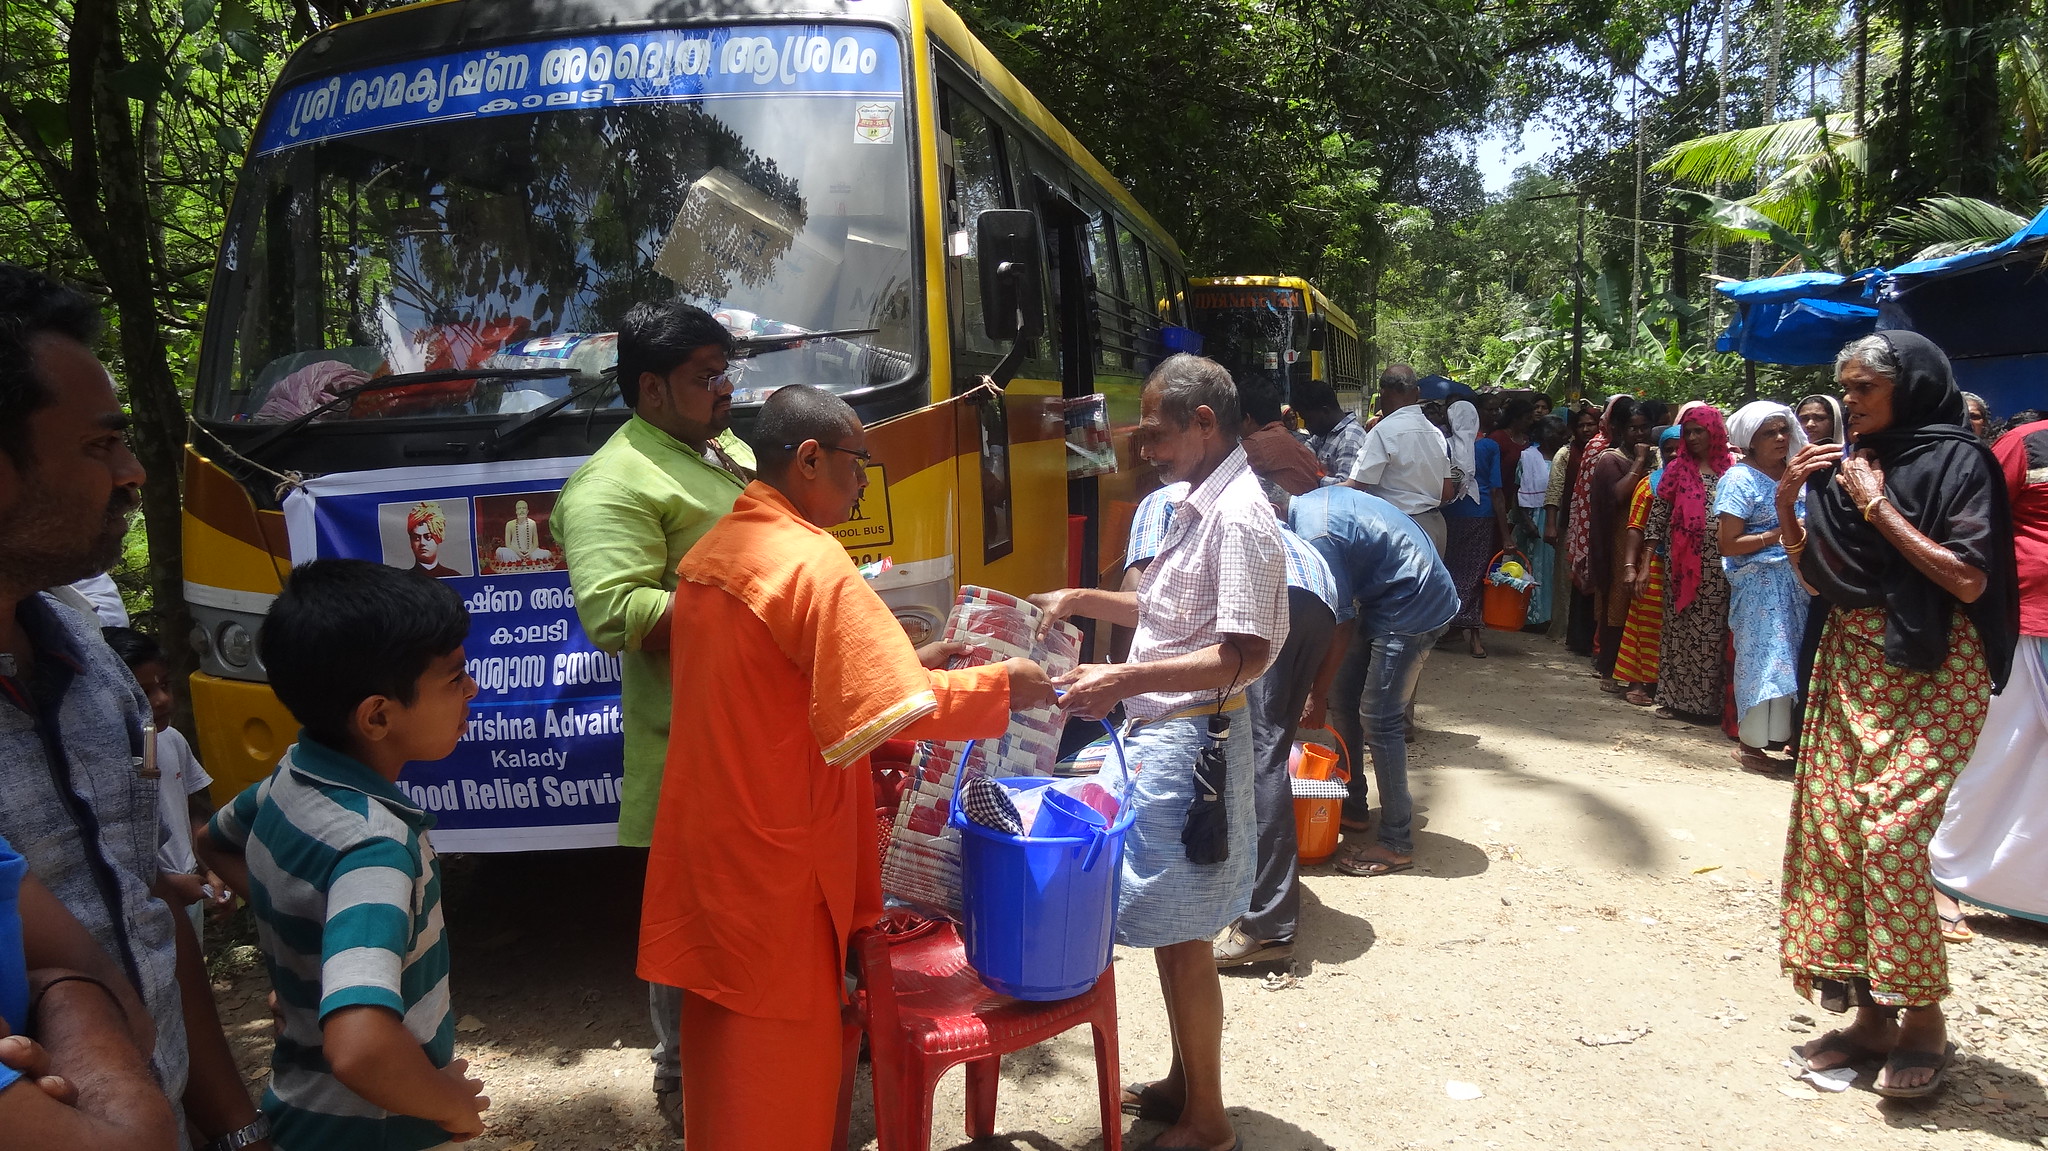 Relief distribution in progress by Kalady centre